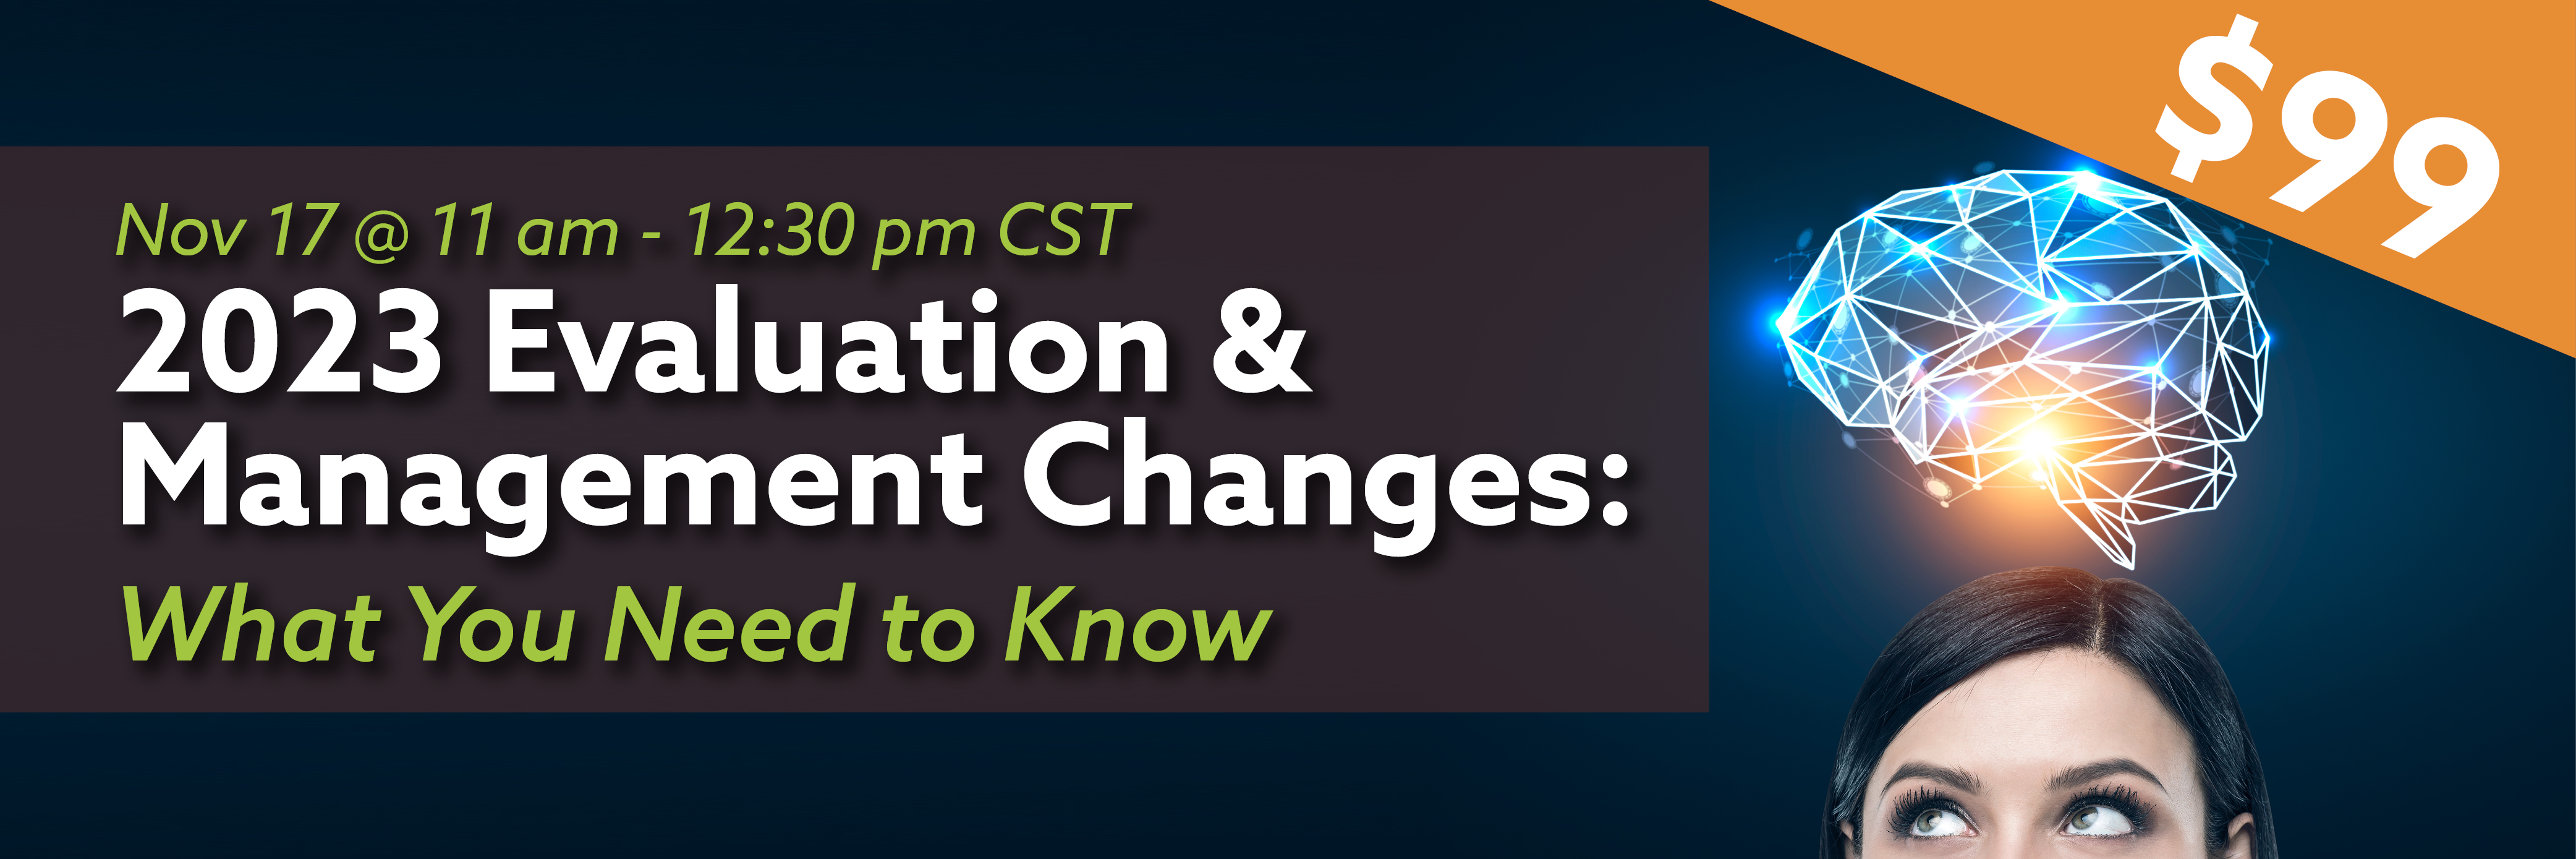 Nov 17 @ 11 am - 12:30 pm CST, 2023 Evaluation & Management Changes: What you Need to Know